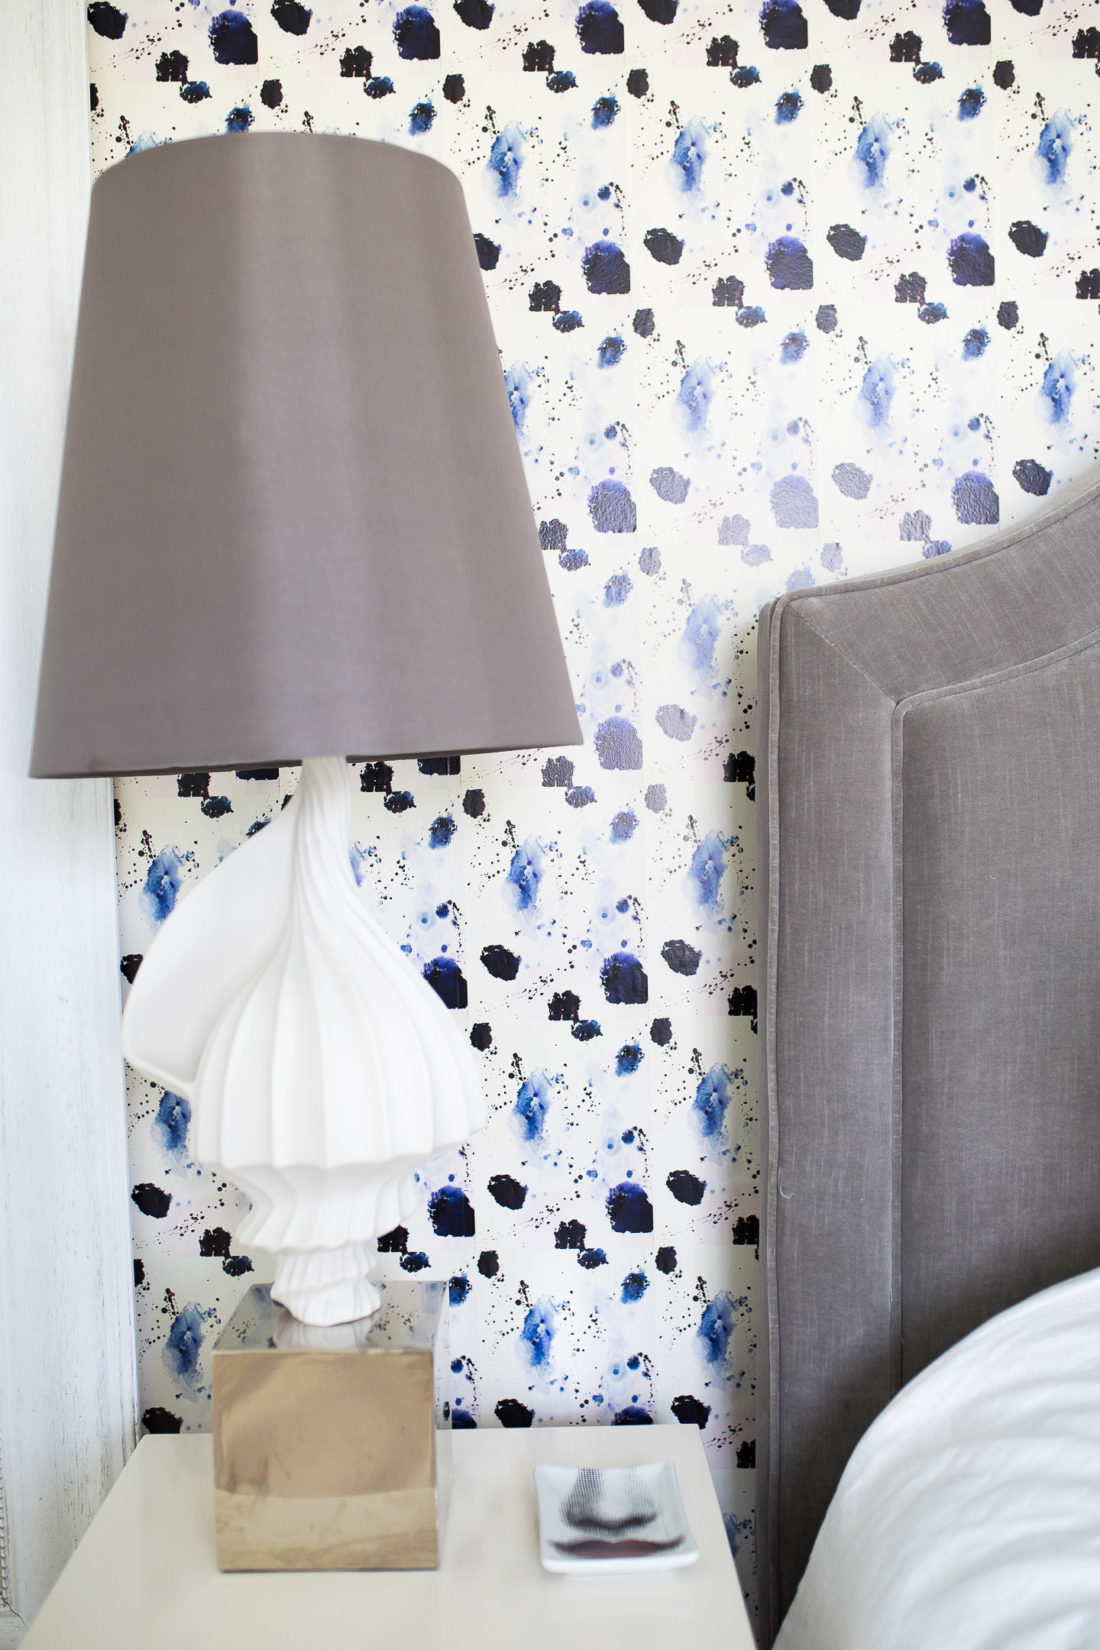 A detail of the bedside table and fun wallpaper in the guest room of Eva Amurri Martino's connecticut home